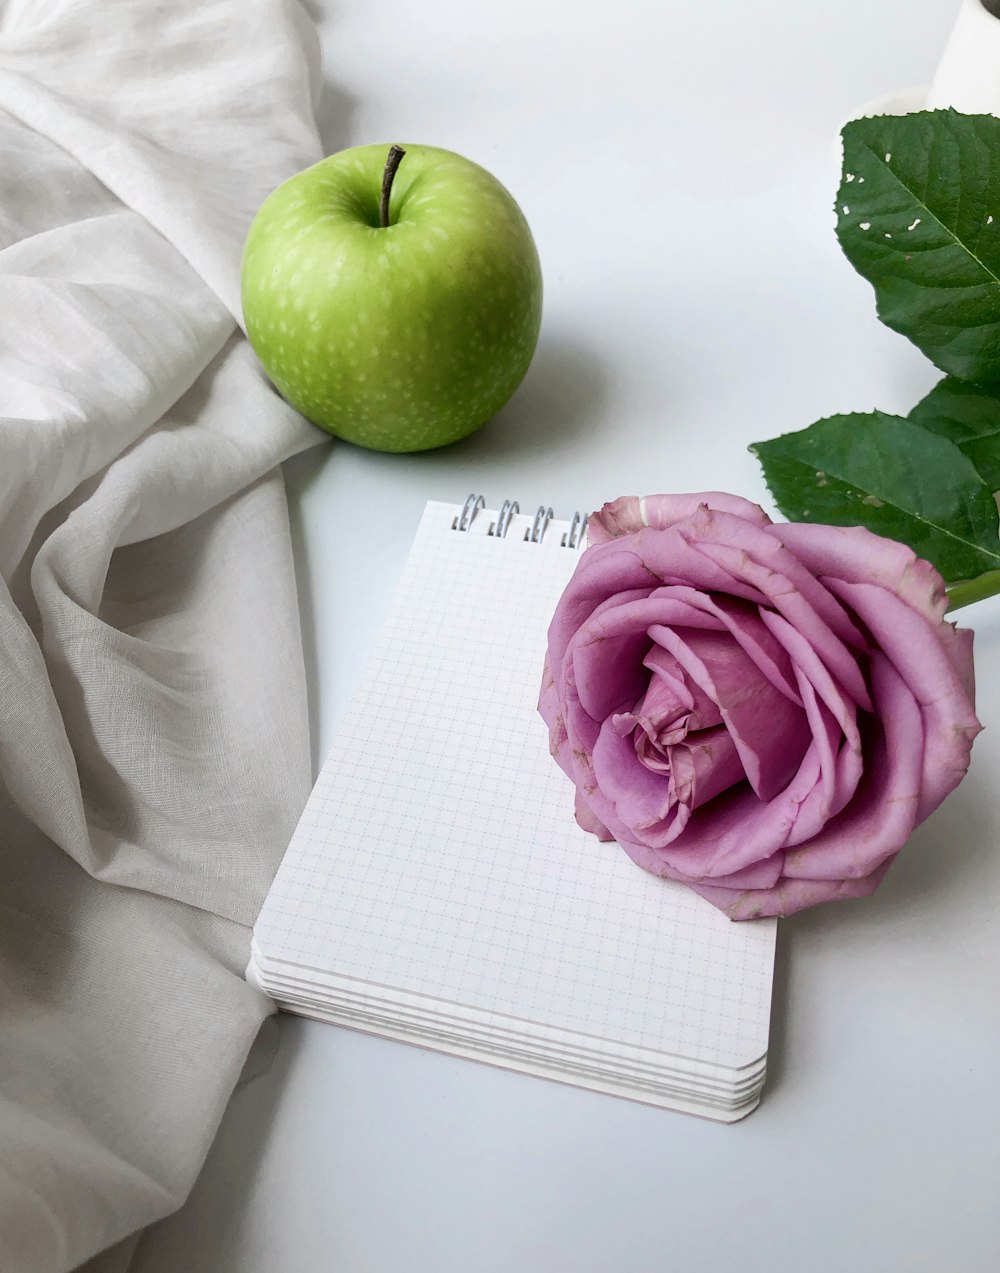 green apple near a pink petaled rose flower and white mini-notebook